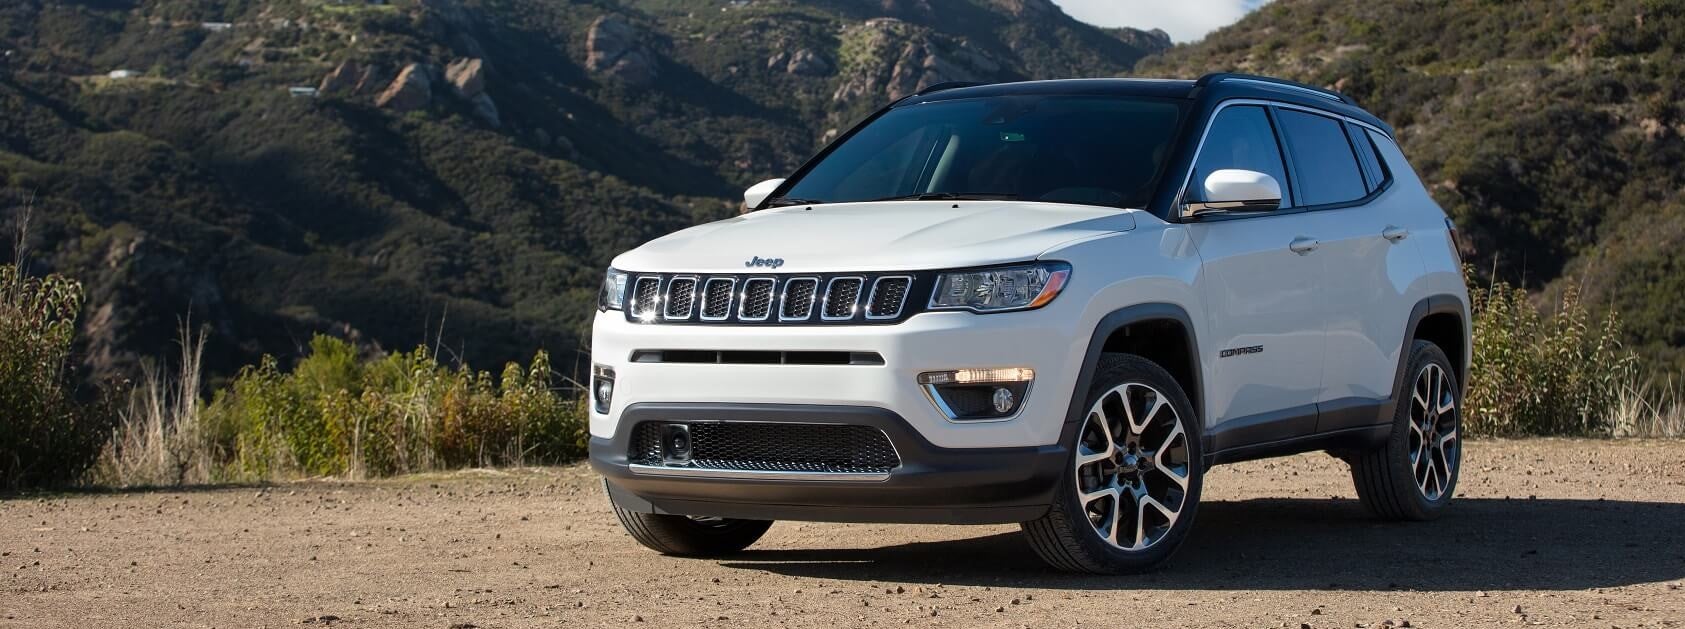 2021 Jeep Compass Review Woodhaven MI